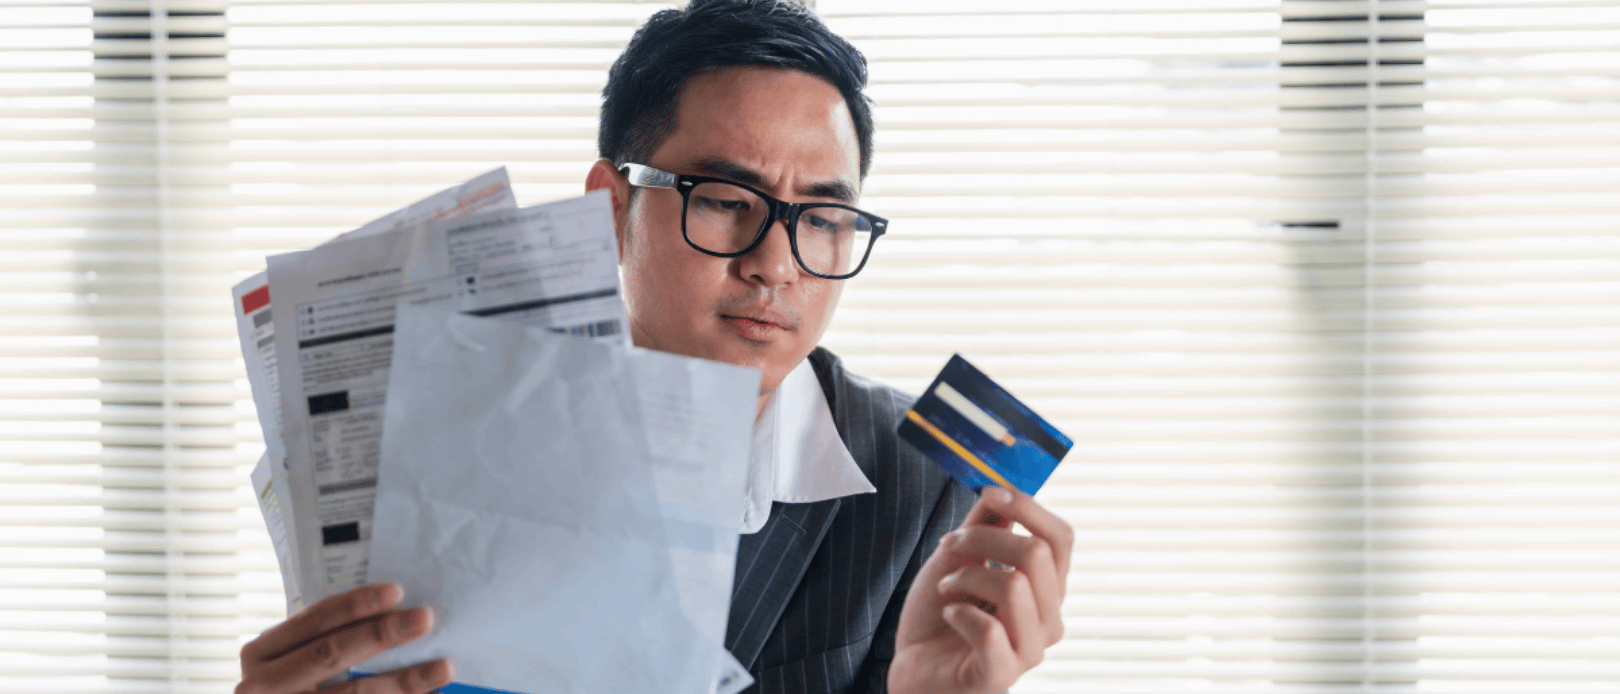 Stressed young asian businessman holding so many expenses bills electricity bill,water bill,internet bill,cell phone bill and credit card bill in his hand no money to pay debt